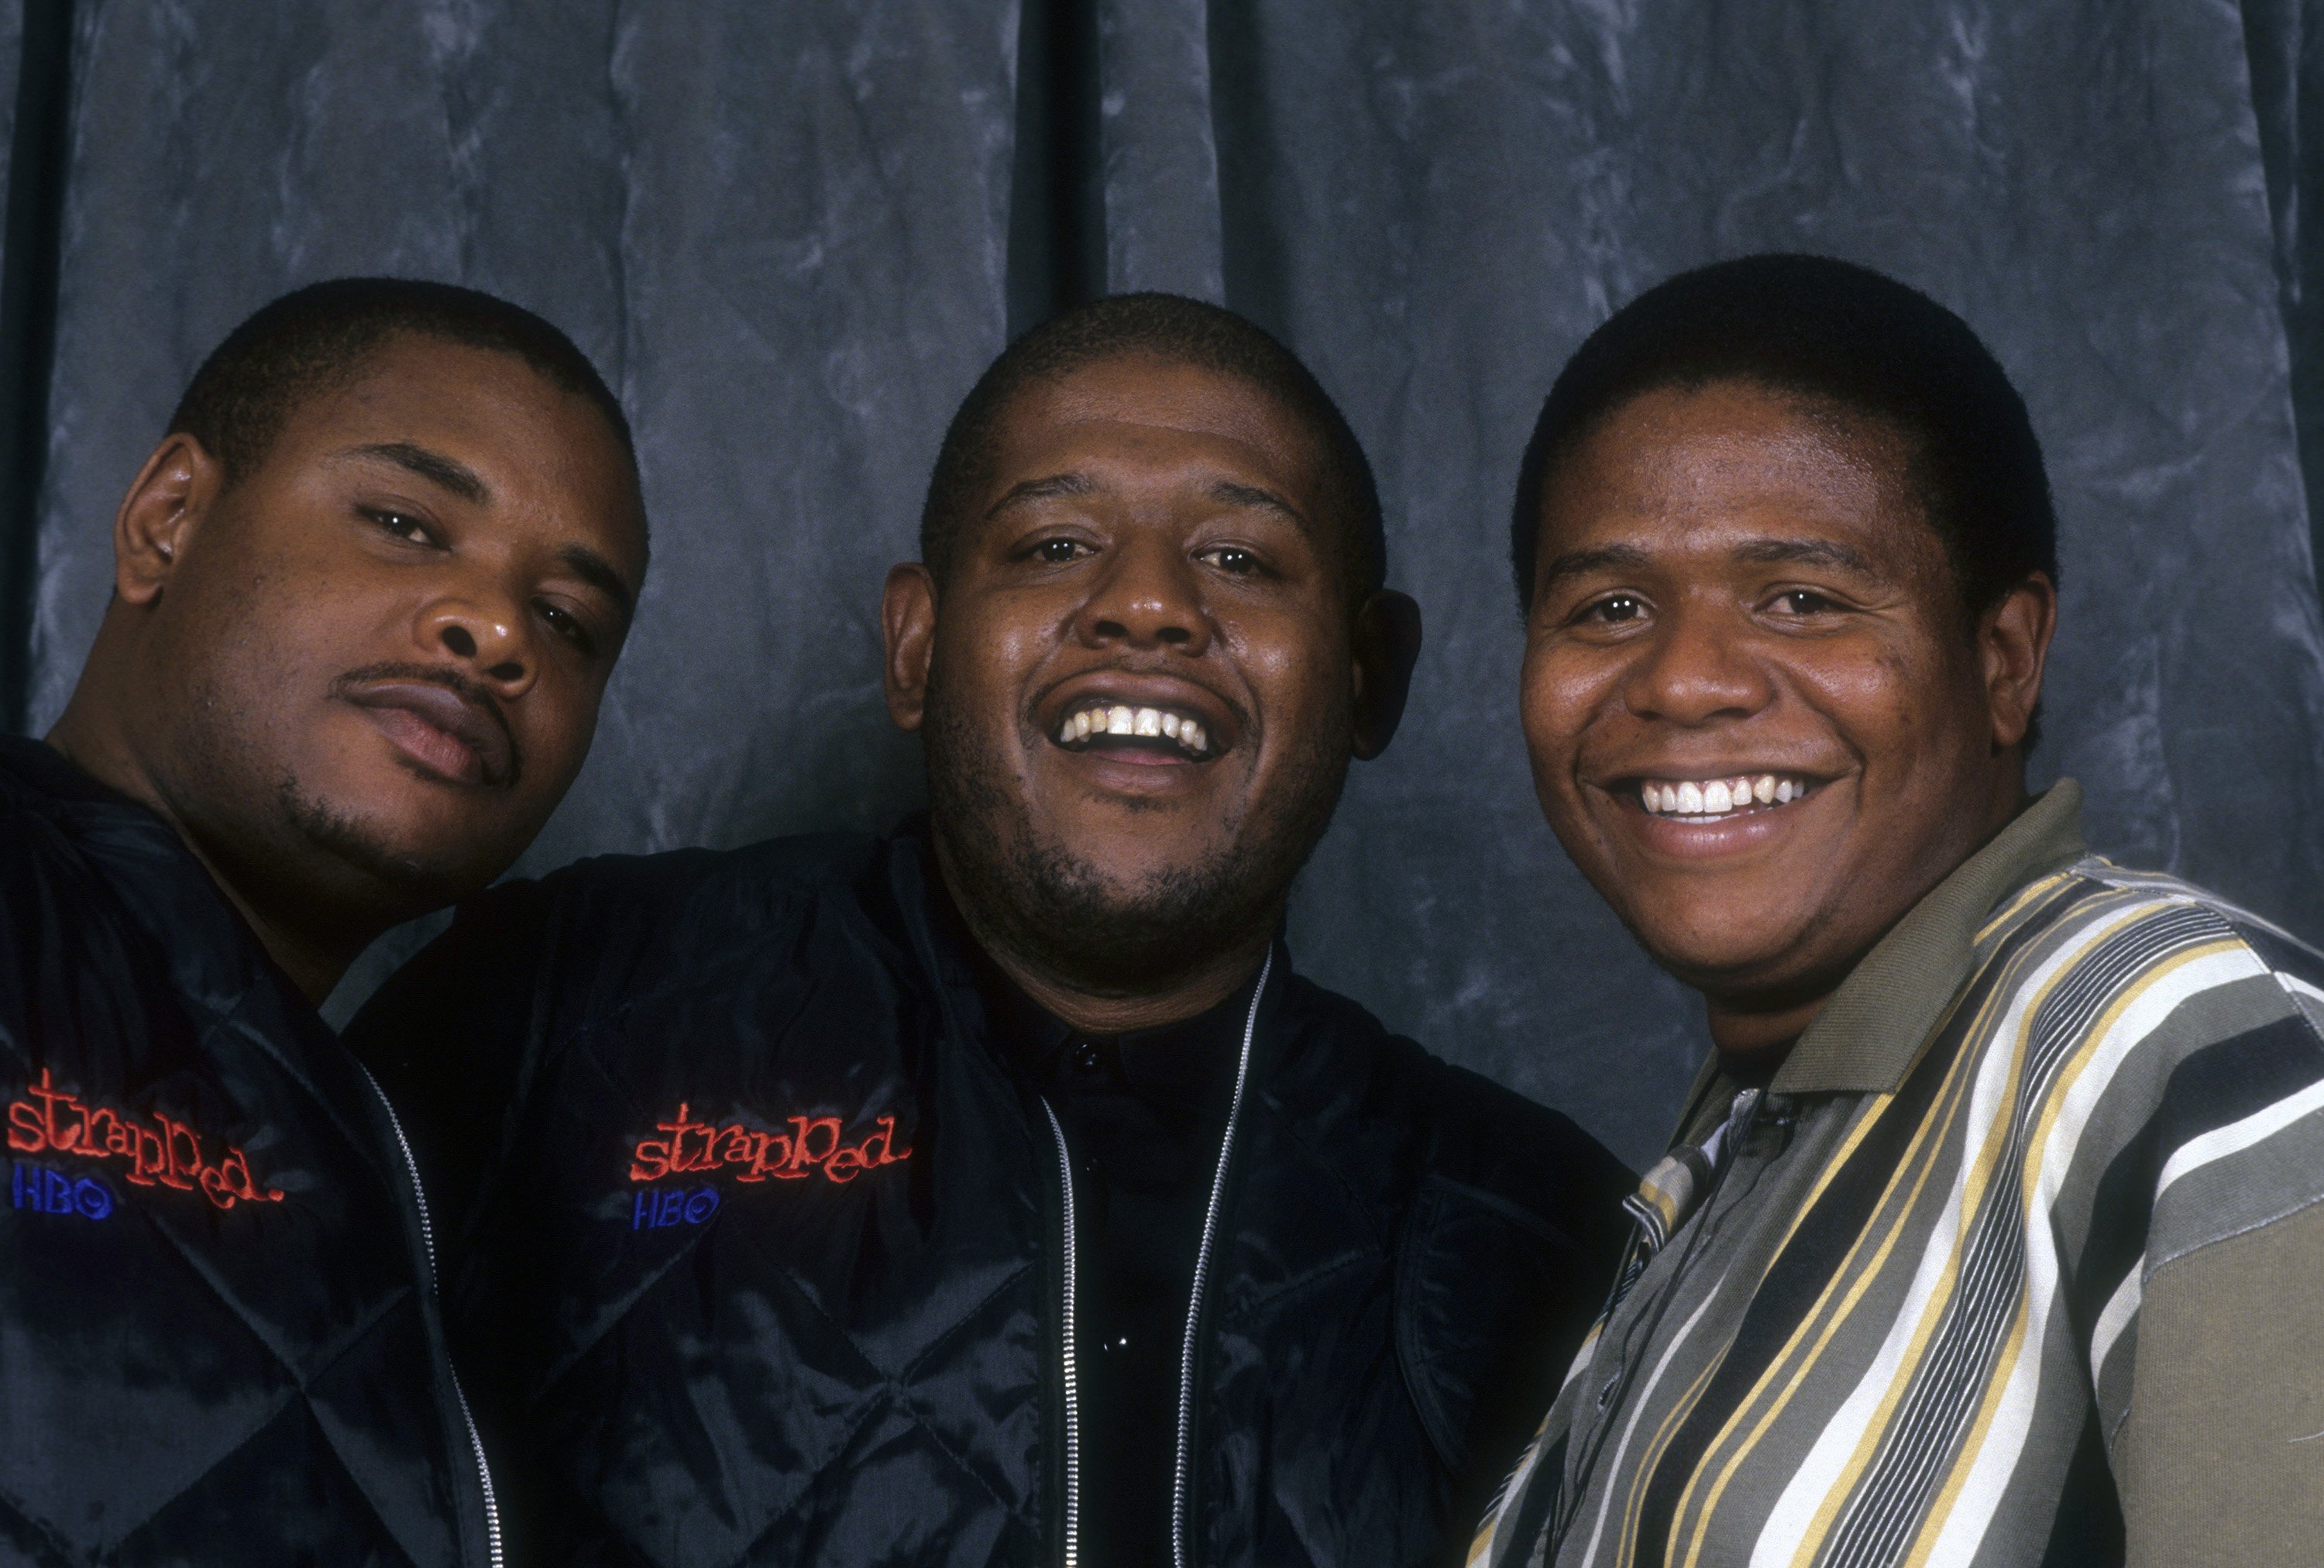 Forest Whitaker, Ken Whitaker and Damion Whitaker attend the premiere of the HBO film "Strapped" on August 18, 1993, in New York City. | Source: Getty Images